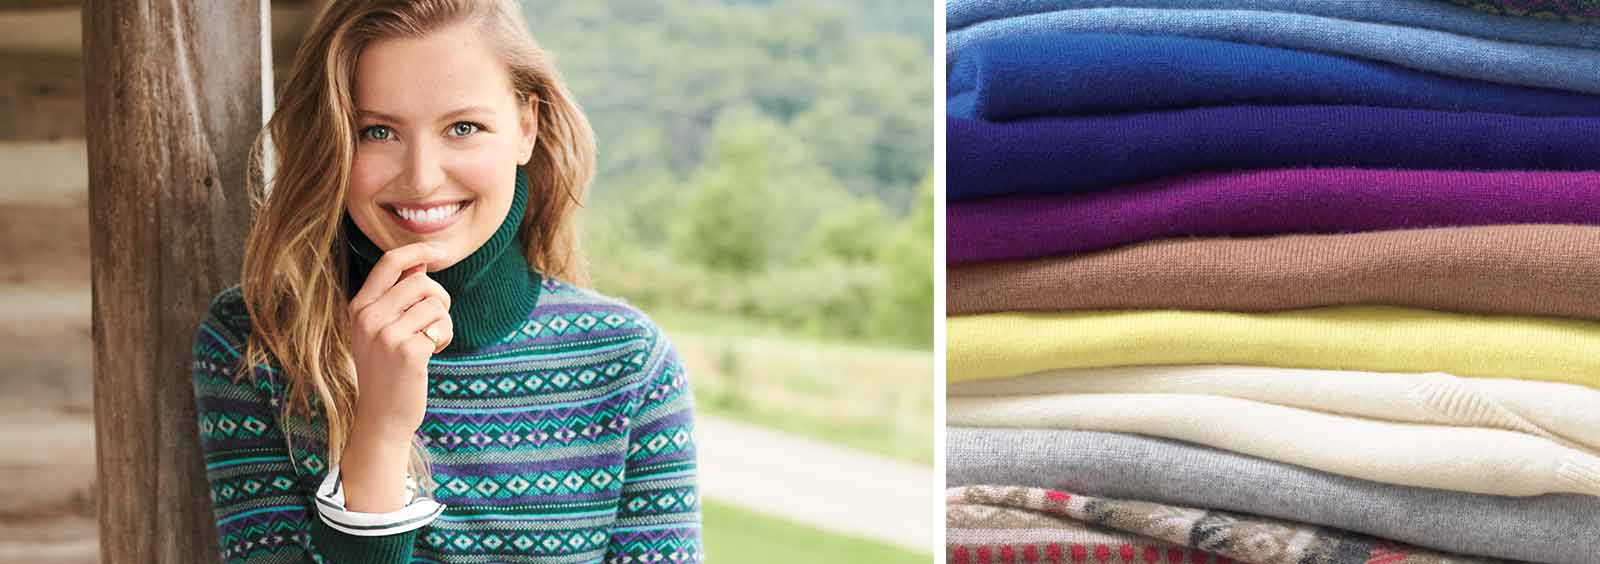 How To Wash and Care for Cashmere Sweater